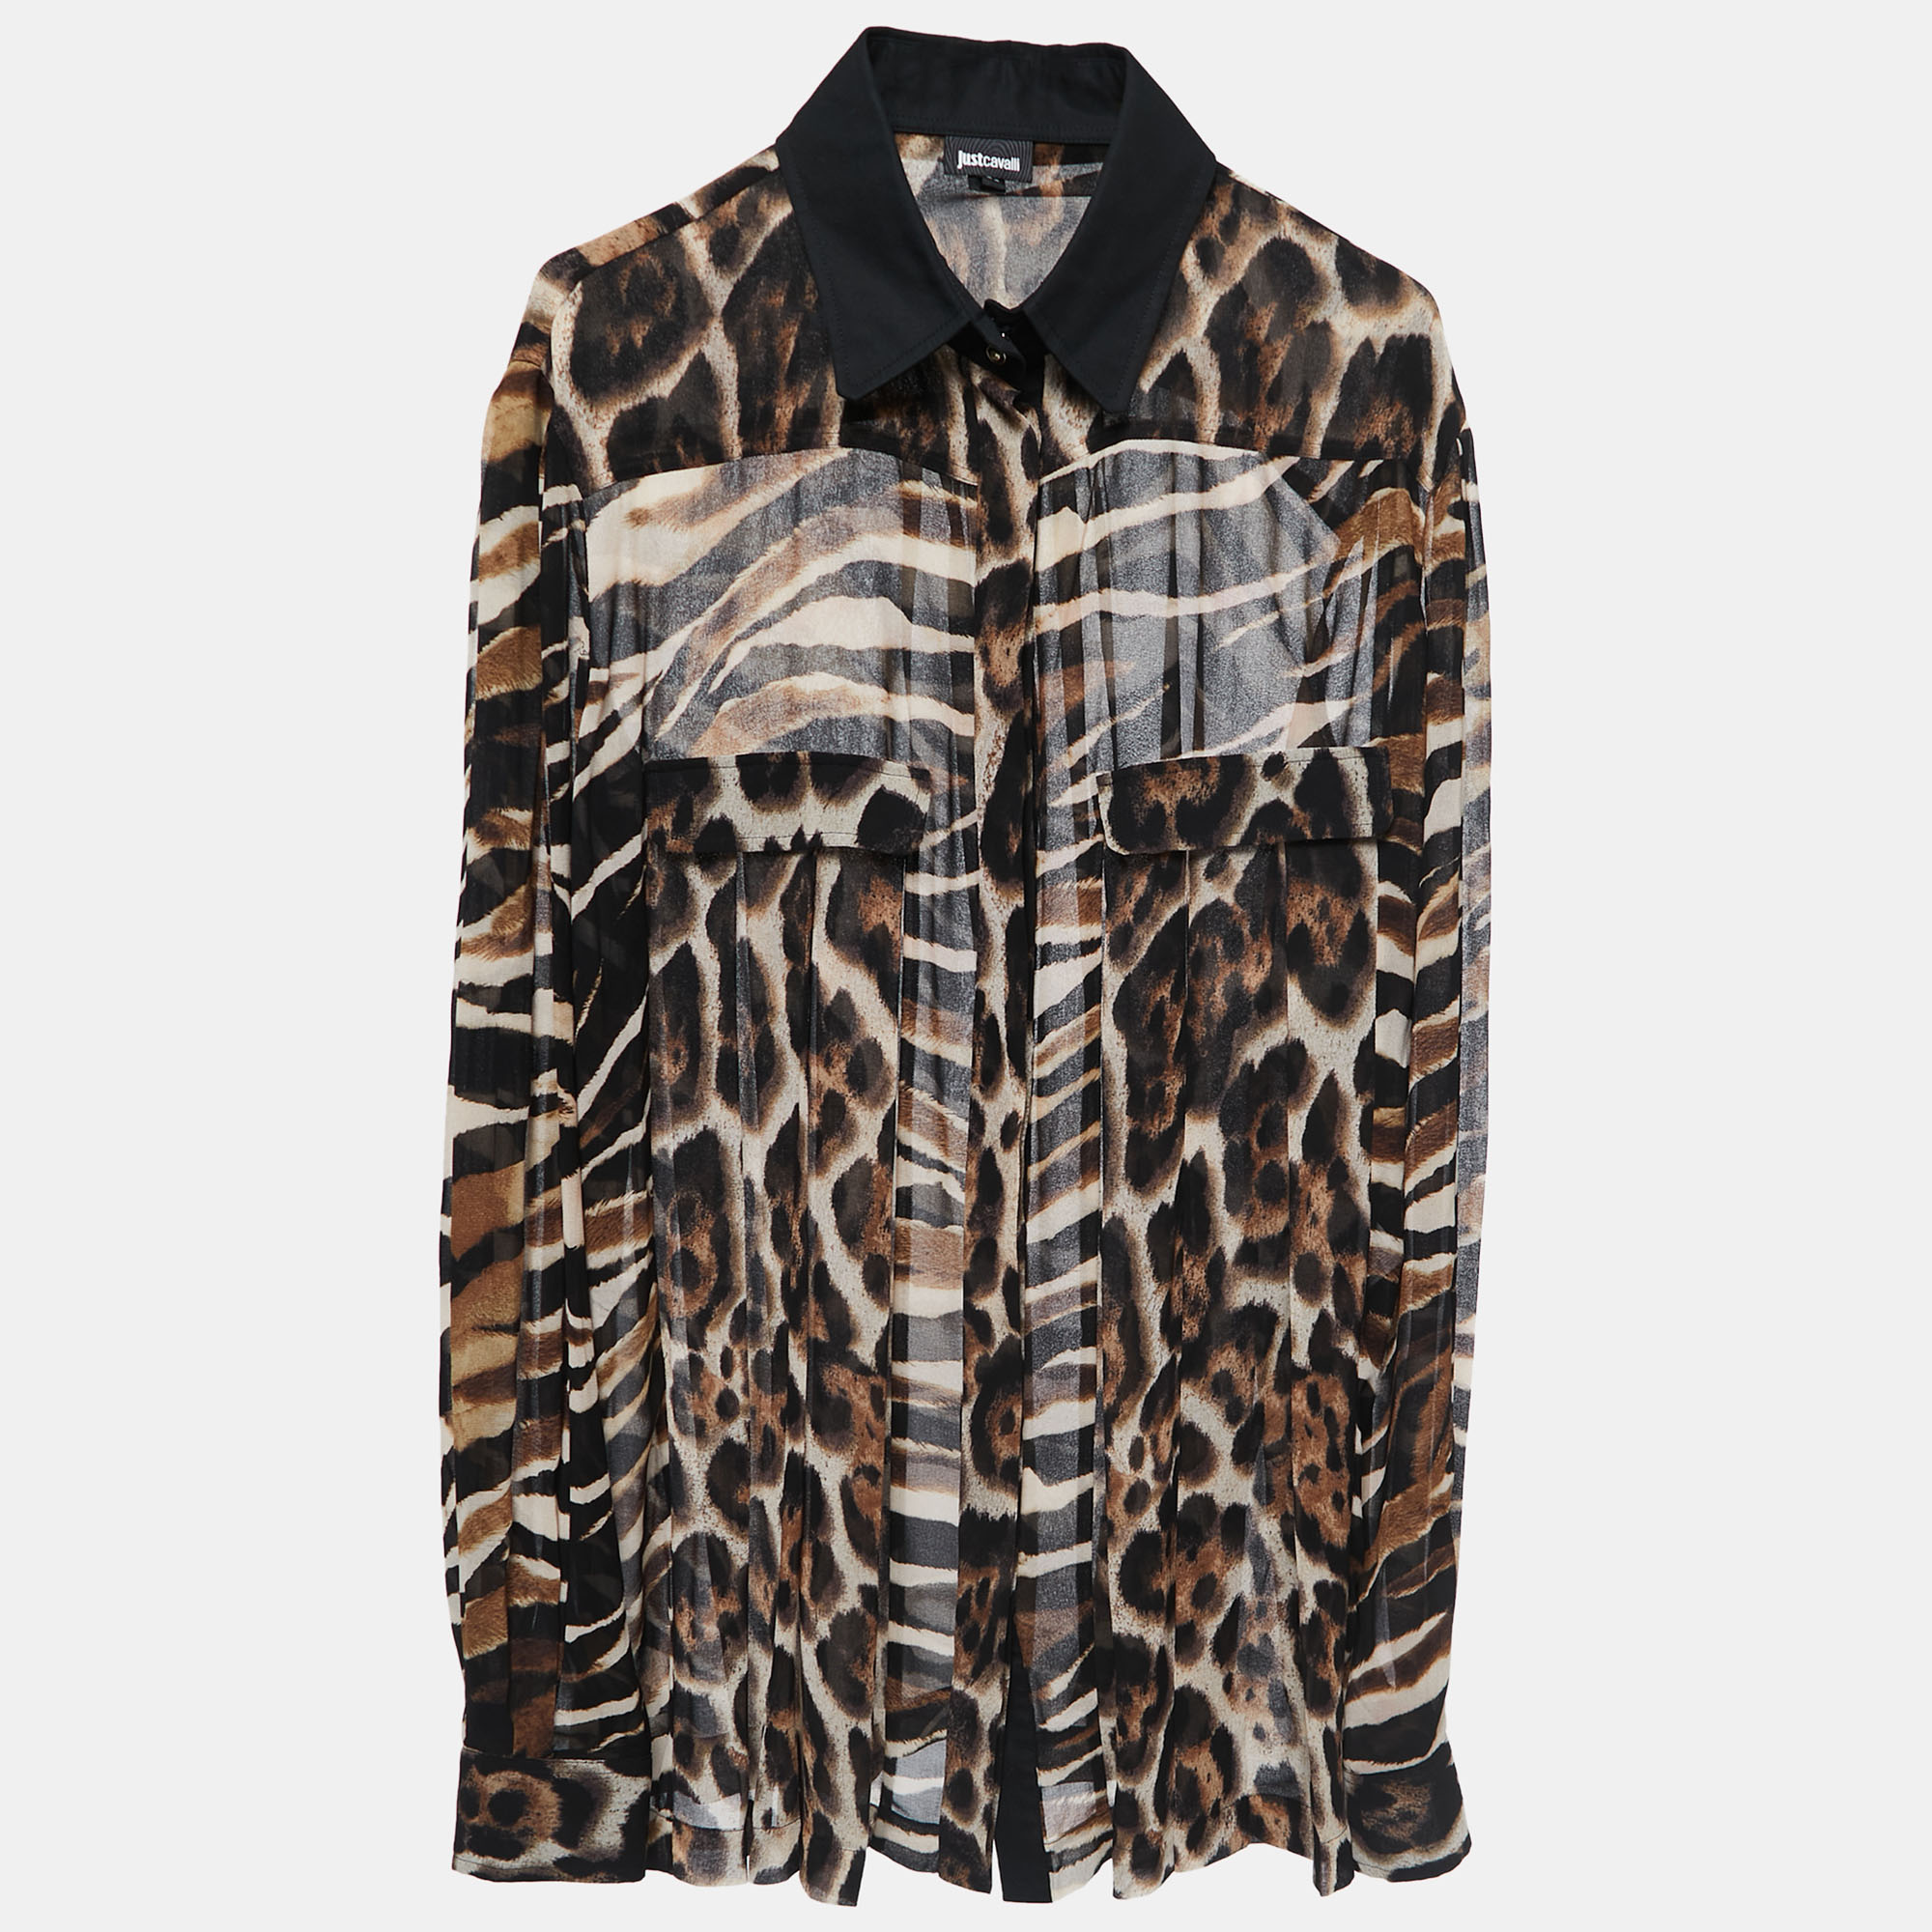 Pre-owned Just Cavalli Black Animal Print Synthetic Button Front Full Sleeve Shirt Blouse Xl